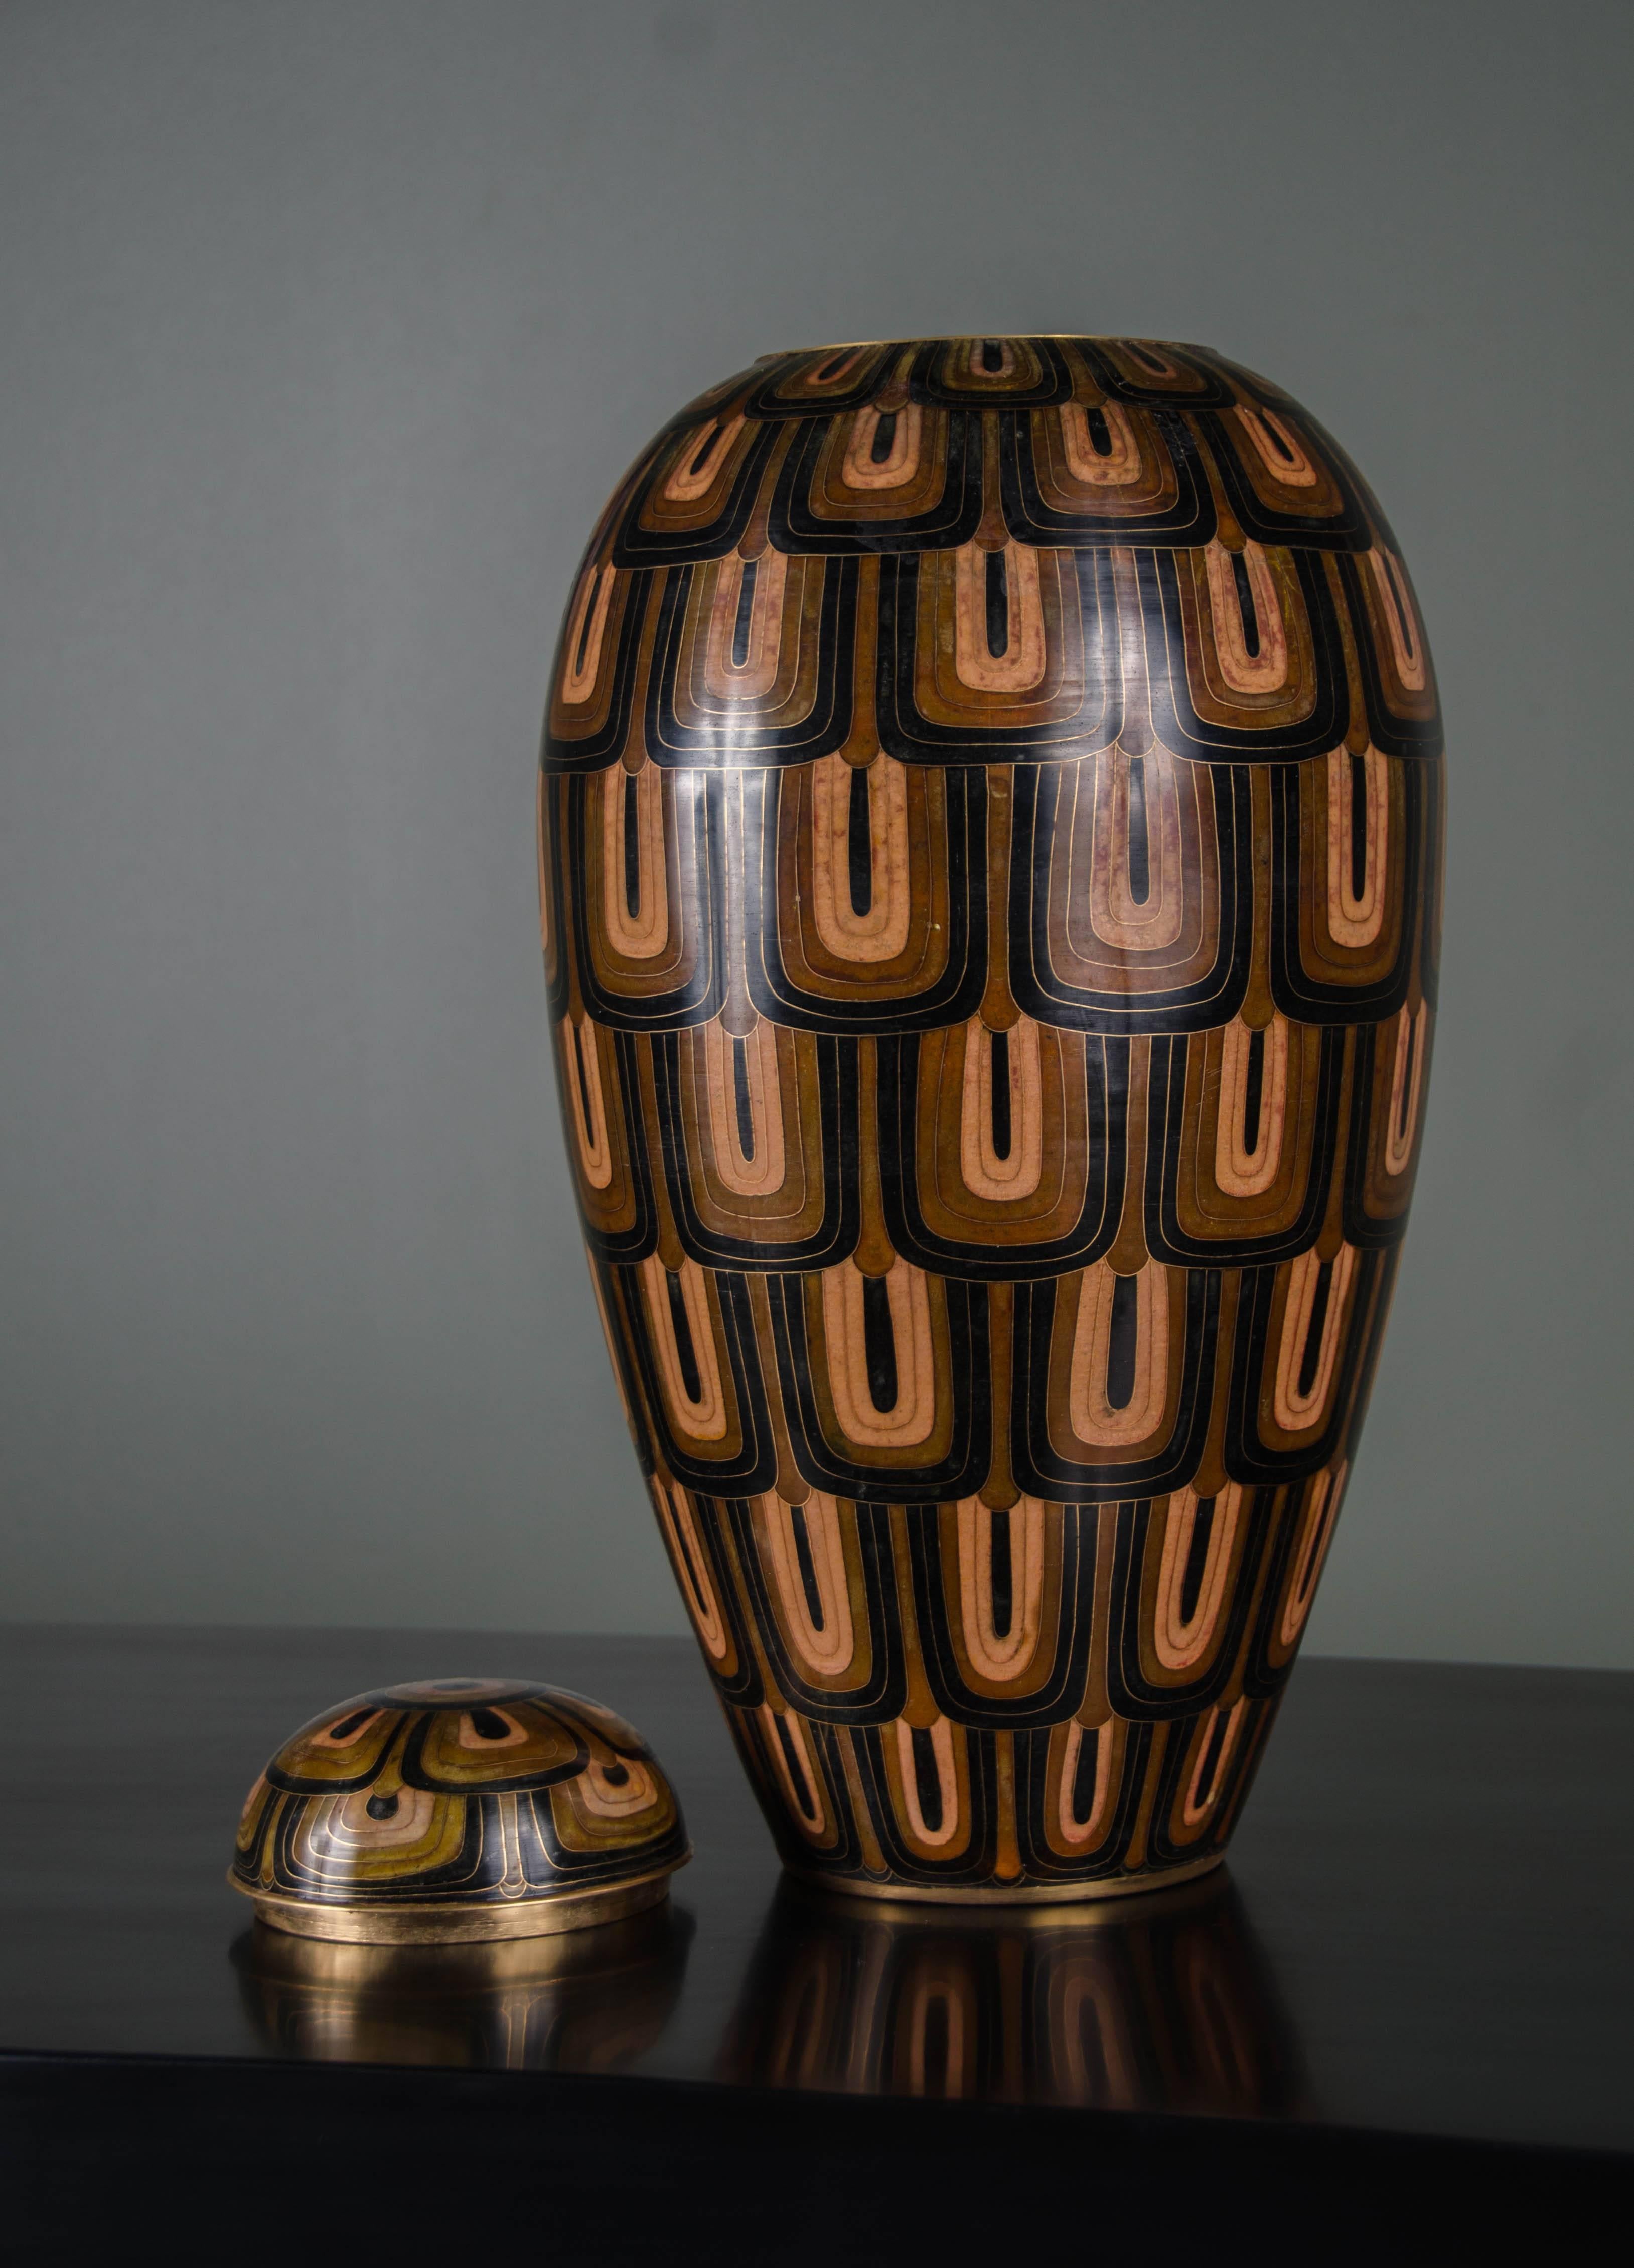 Baluster Jar & Lid
Fish Scale Design
Cloisonne
Amber, Brown, and Black
Hand Made
Limited Edition
 